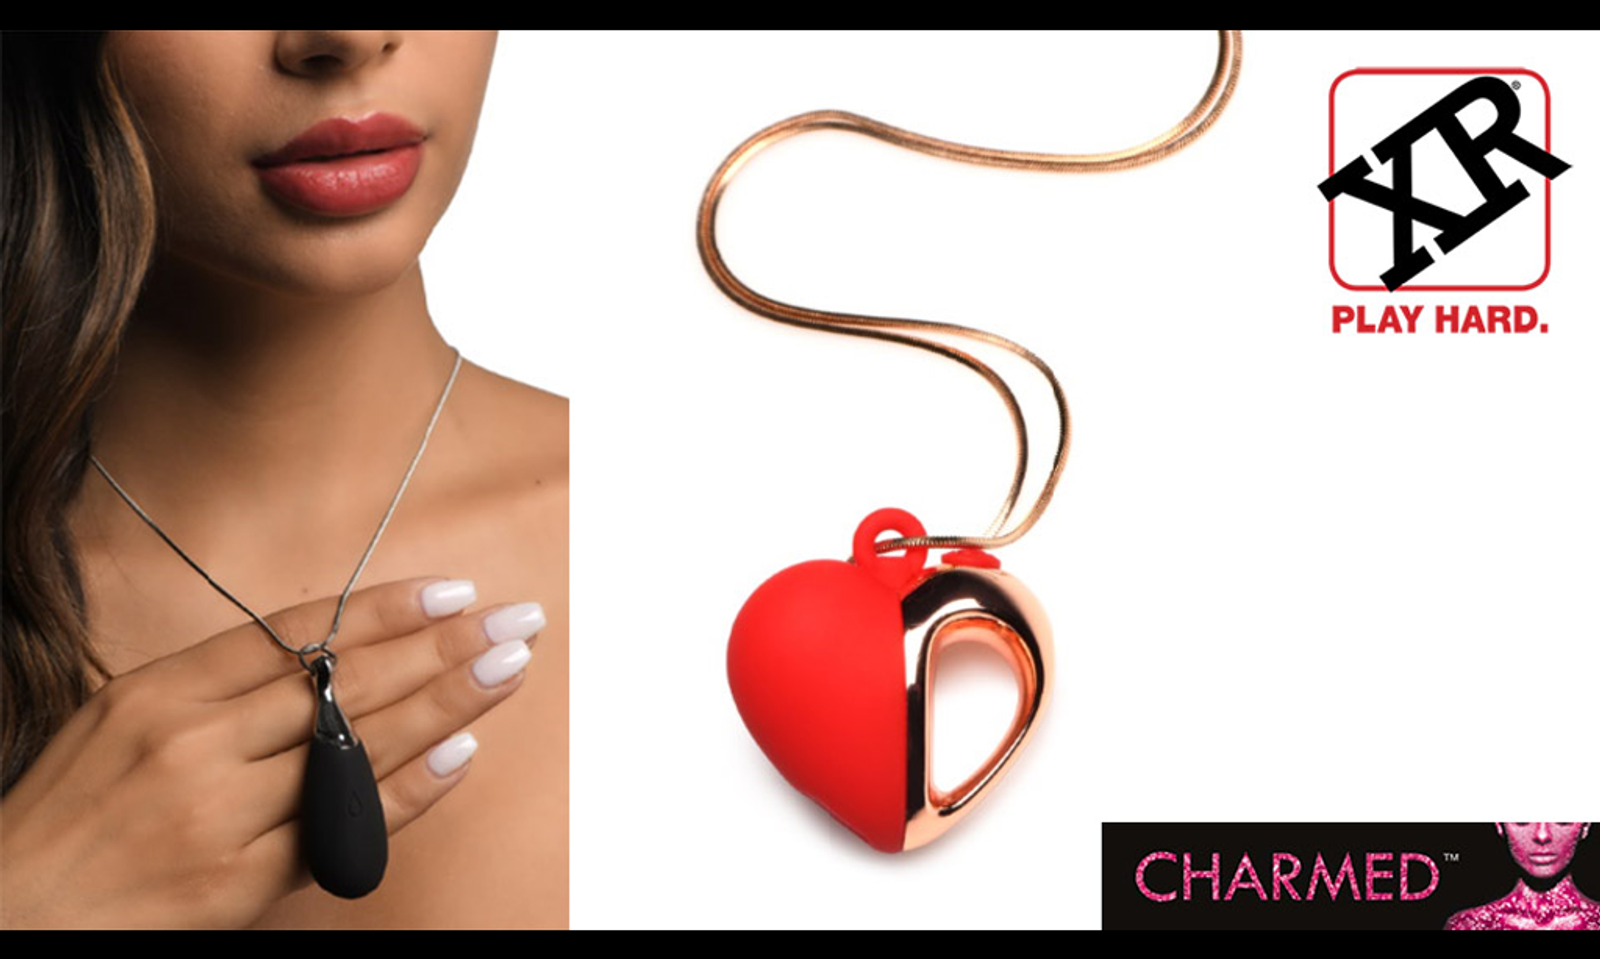 XR Brands Expands 'Charmed' Line With Two Pleasure Necklaces